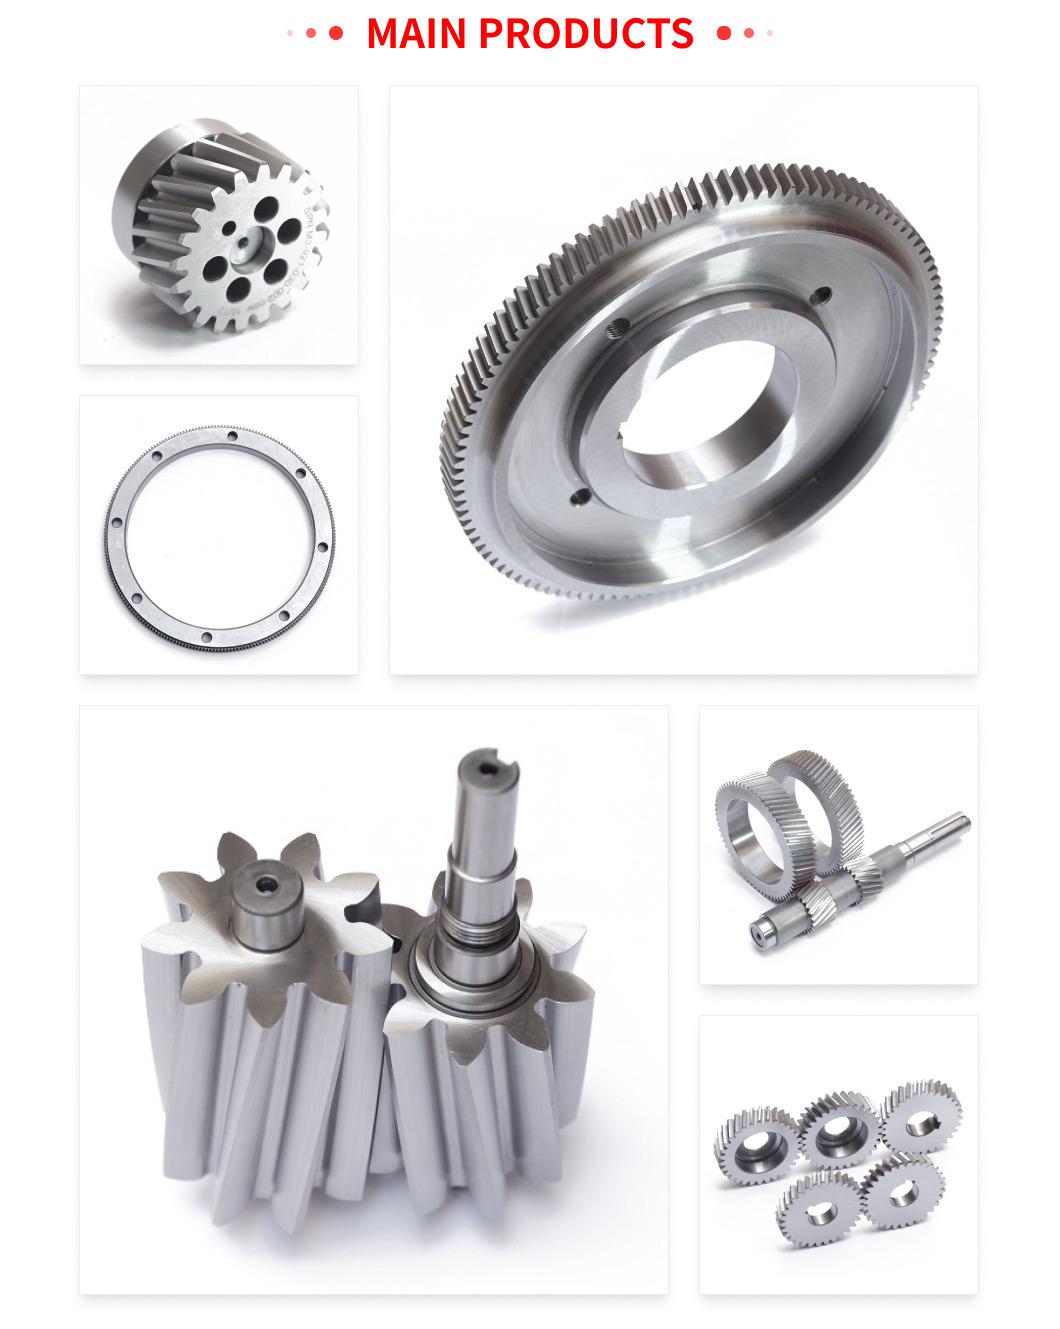 Standard Carbon Steel Spur Gear From China for Transmission Machine